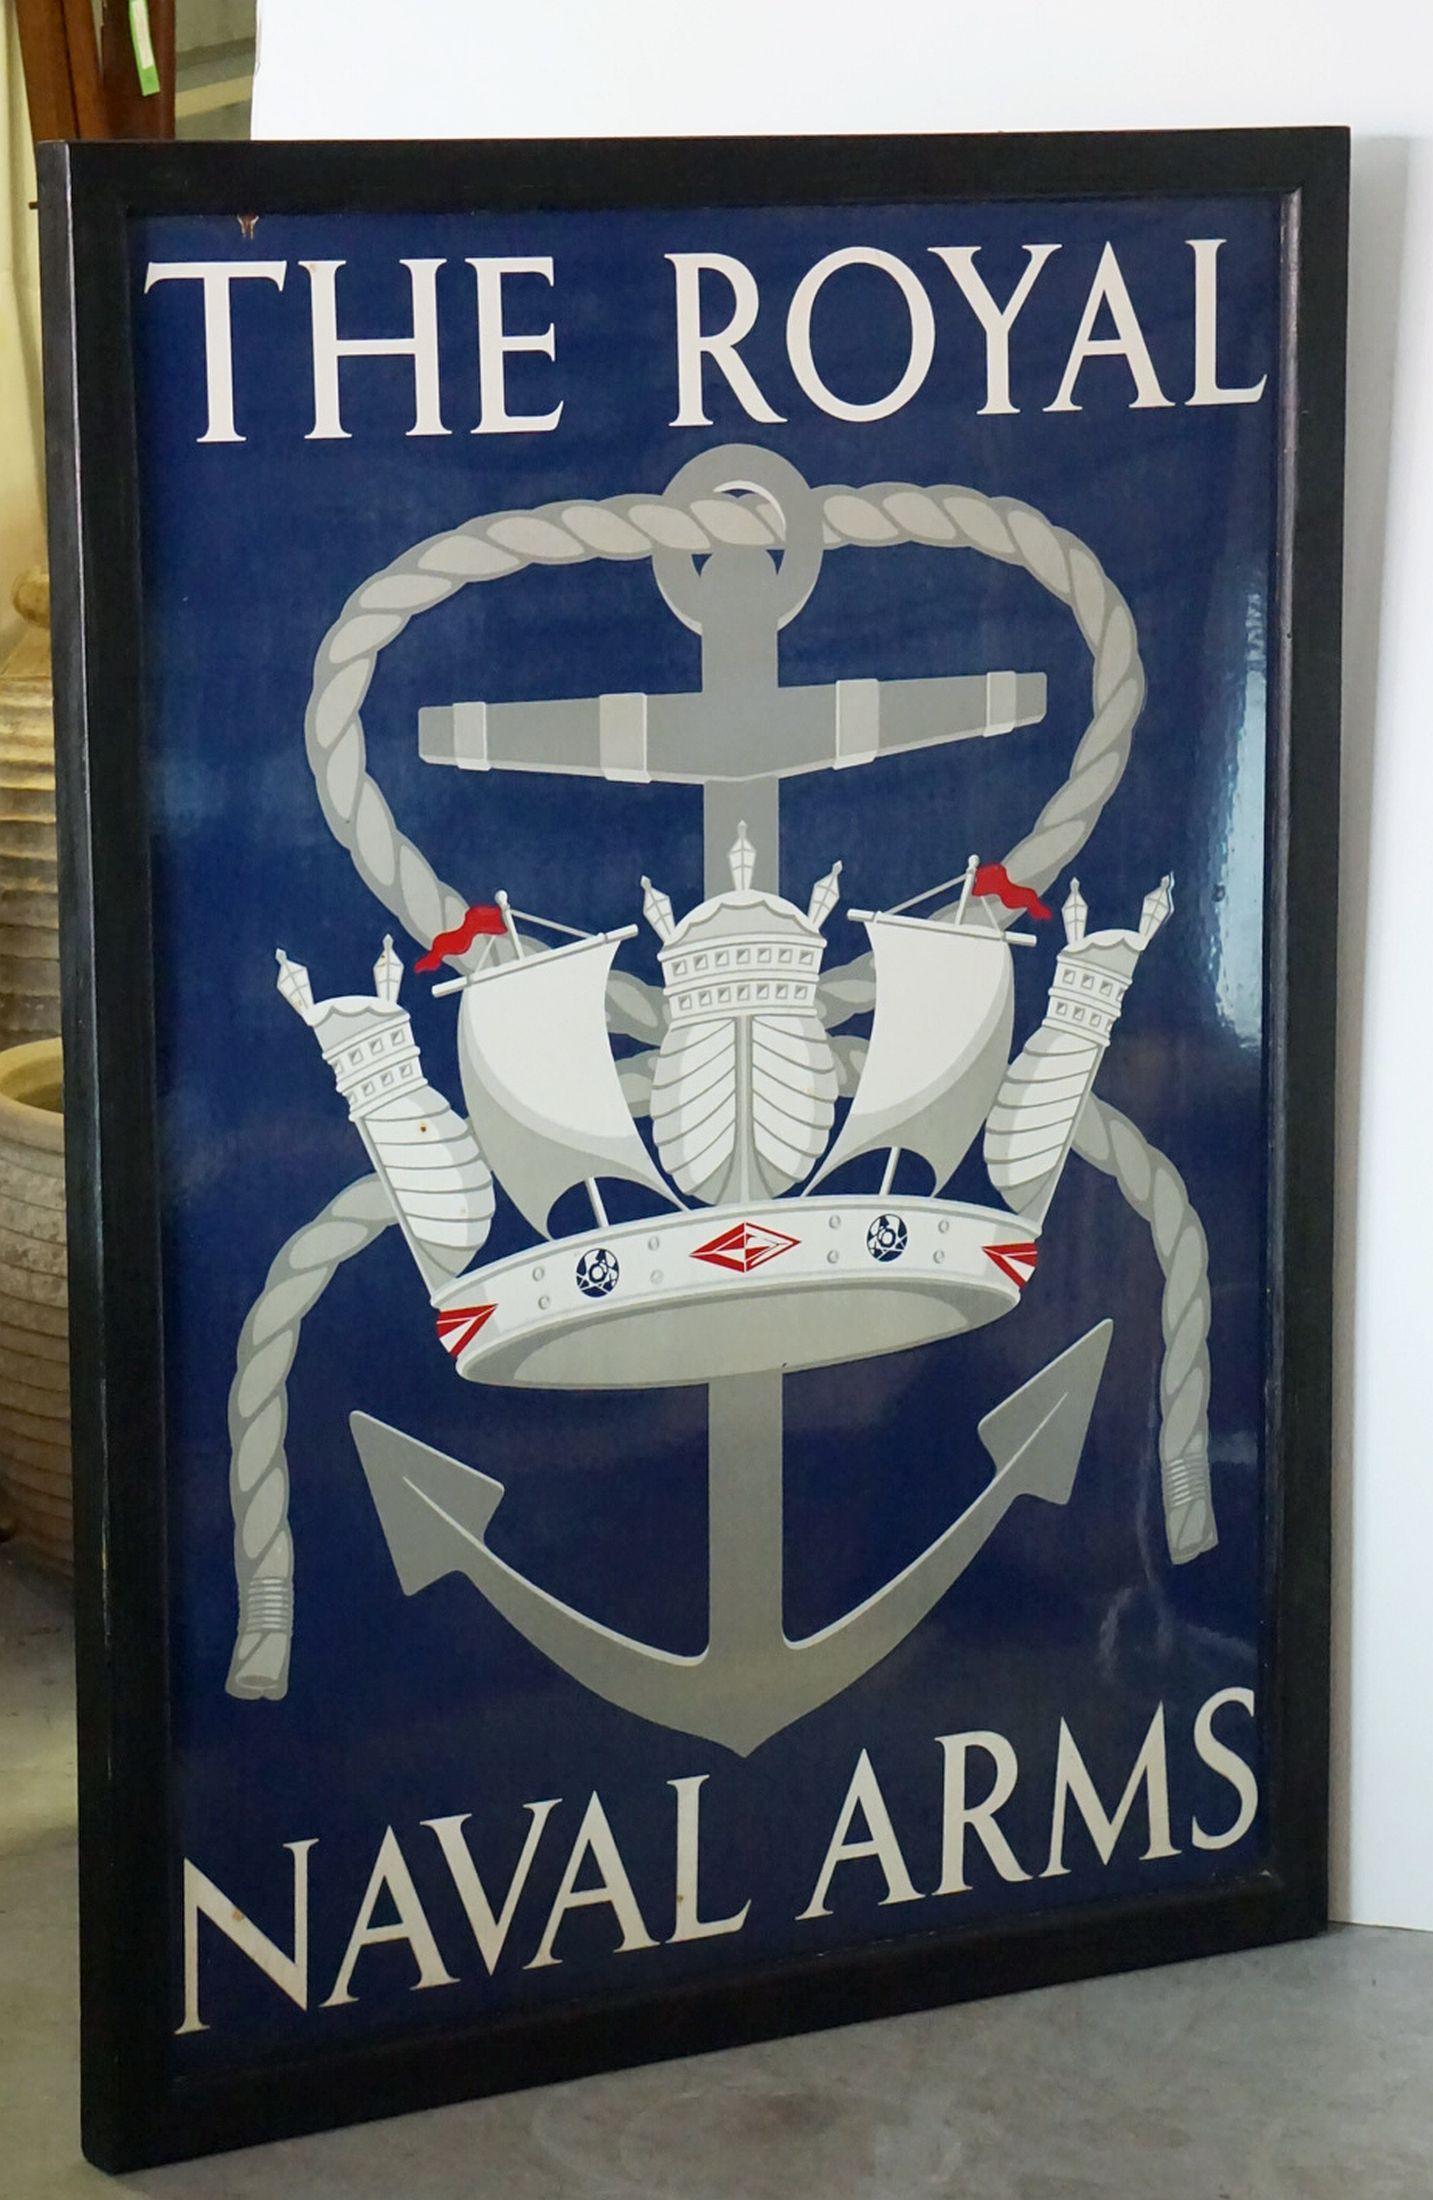 An authentic English pub sign (one-sided) featuring a painting of a stylized royal crown of ships and sails super-imposed upon an anchor, entitled: The Royal Naval Arms.

A very fine example of vintage advertising artwork, ready for display.